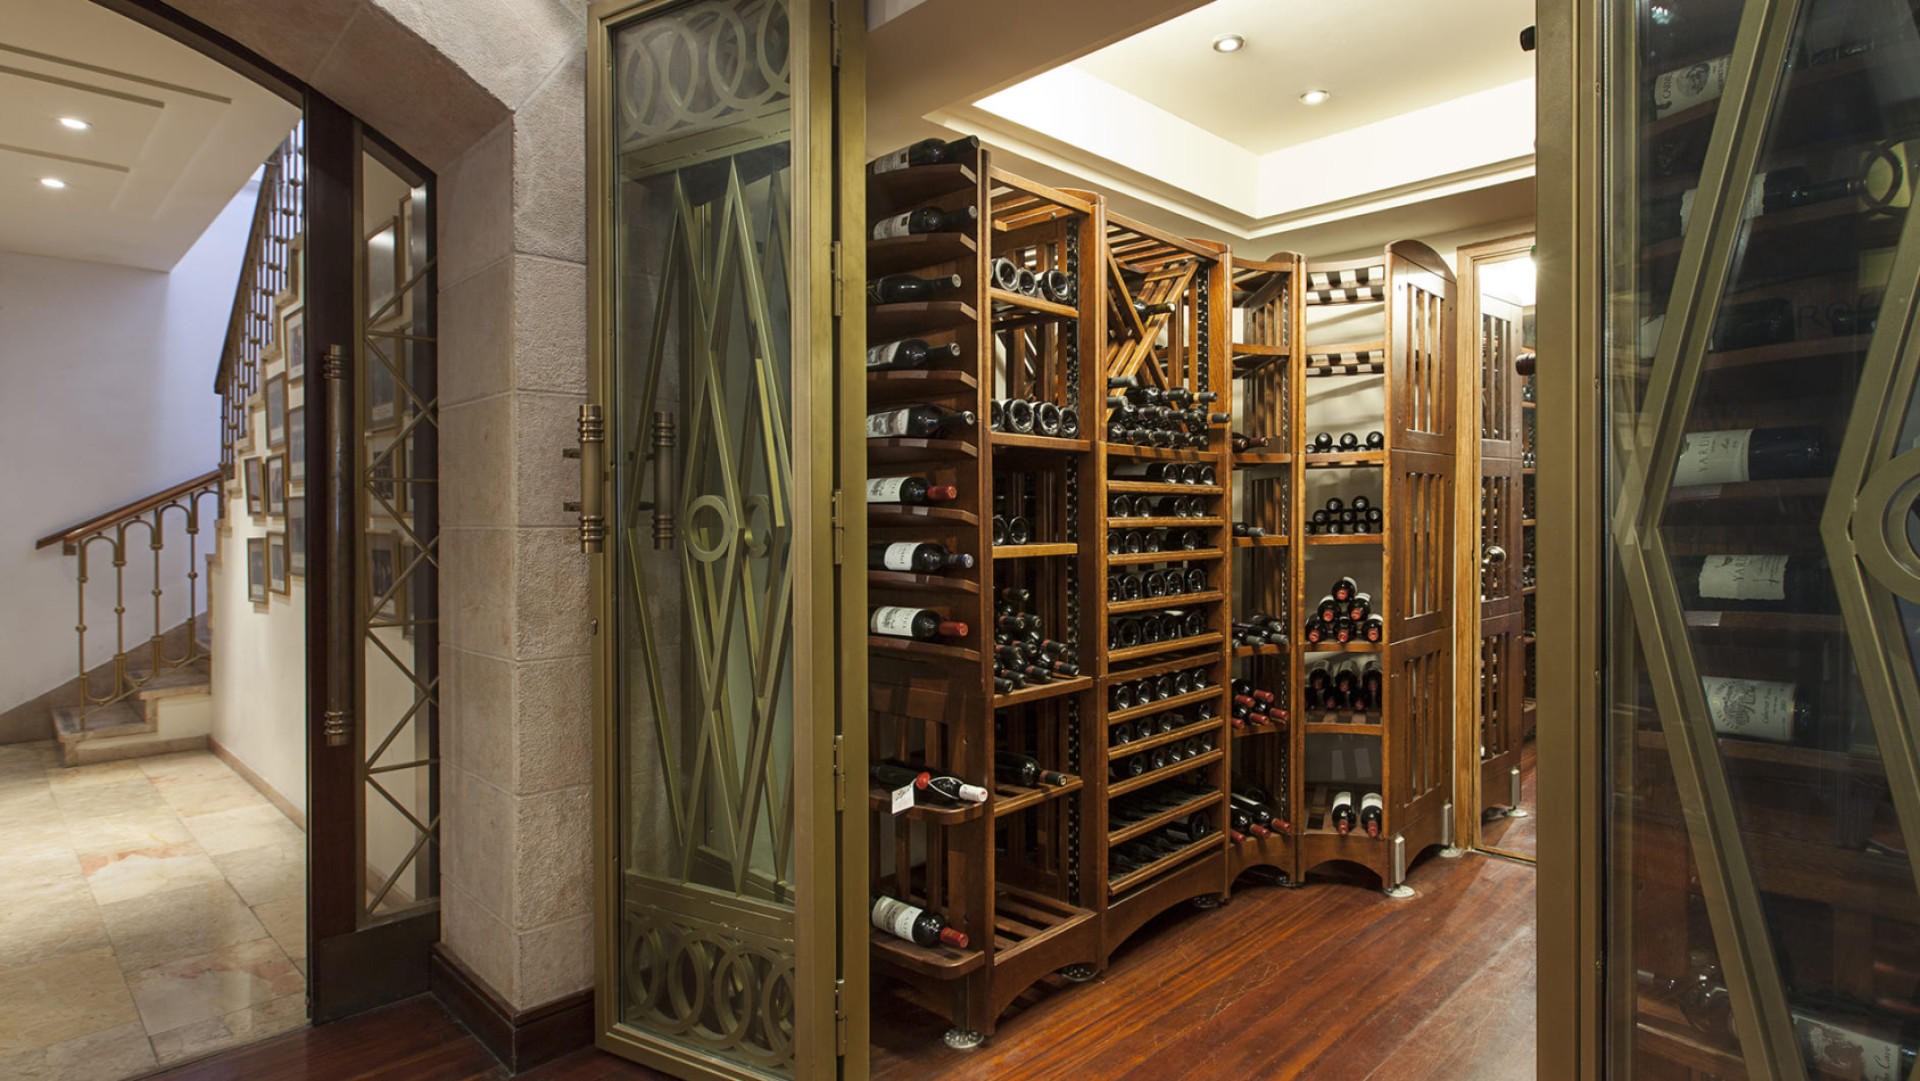 Set up a custom wine cellar like a dressing room with this modular and assembleable furniture that optimizes space, creates a warm atmosphere and gives character to your home.